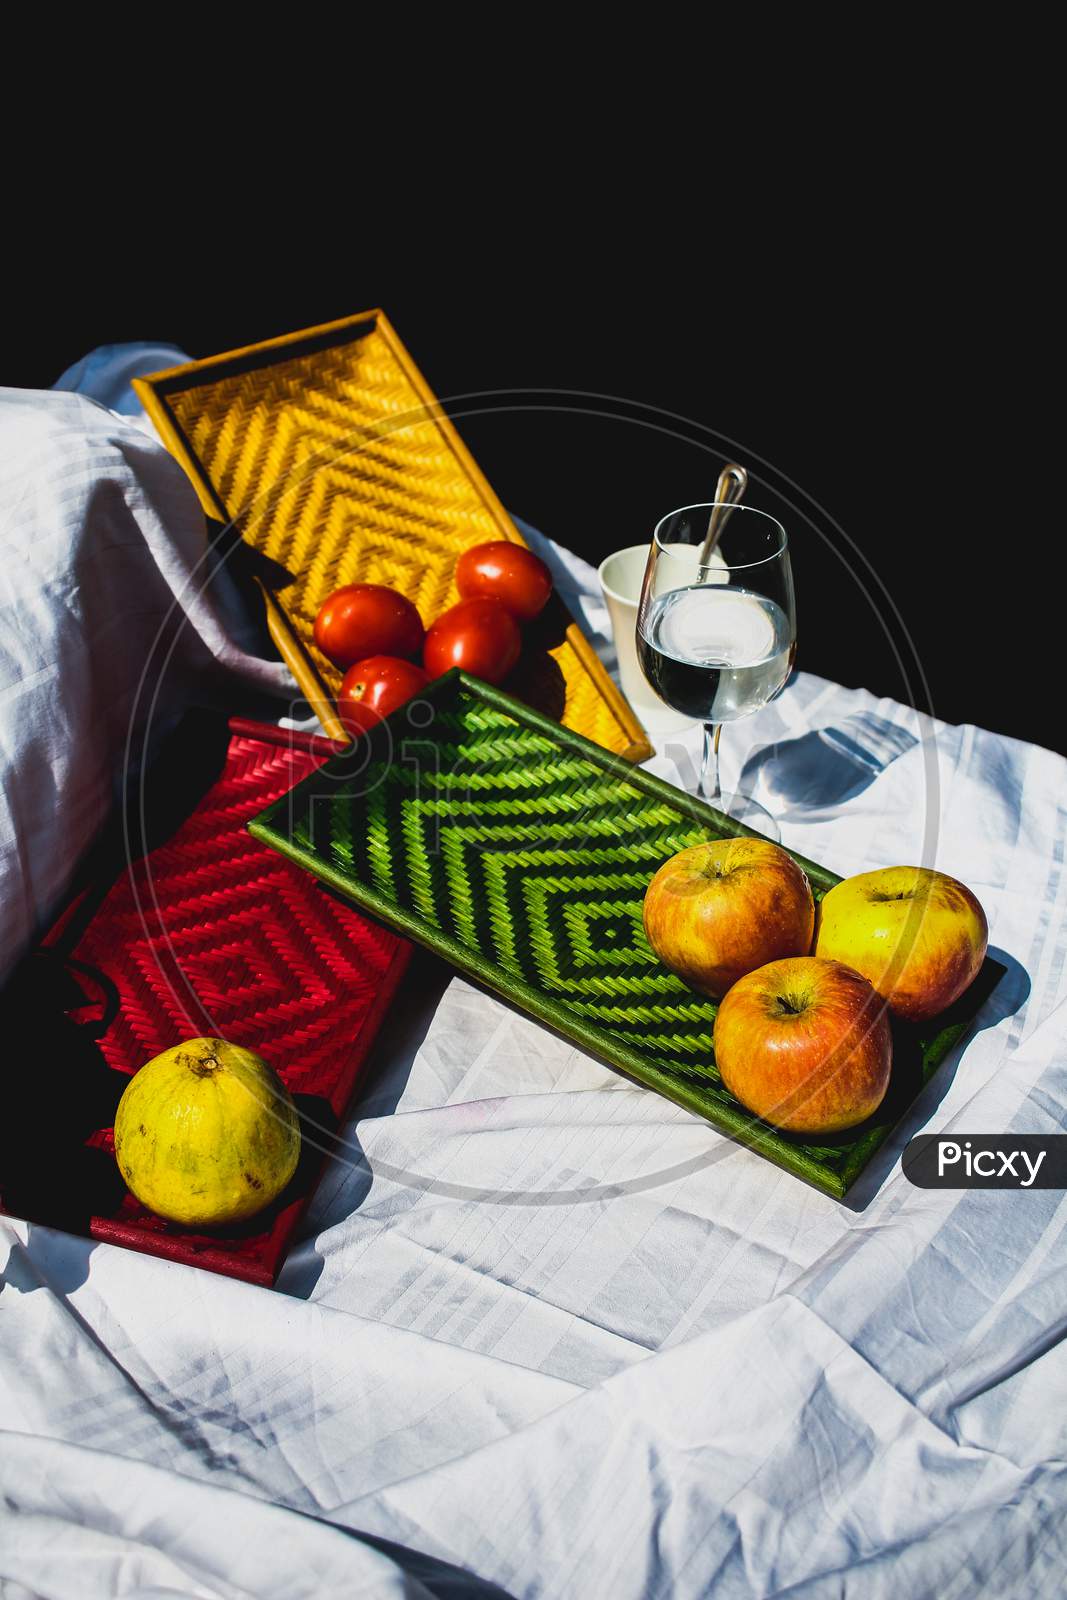 Still Life Of Apples, Pear And Tomatoes Kept On Colorful Exquisite Bamboo Trays Displayed On A White Sheet.